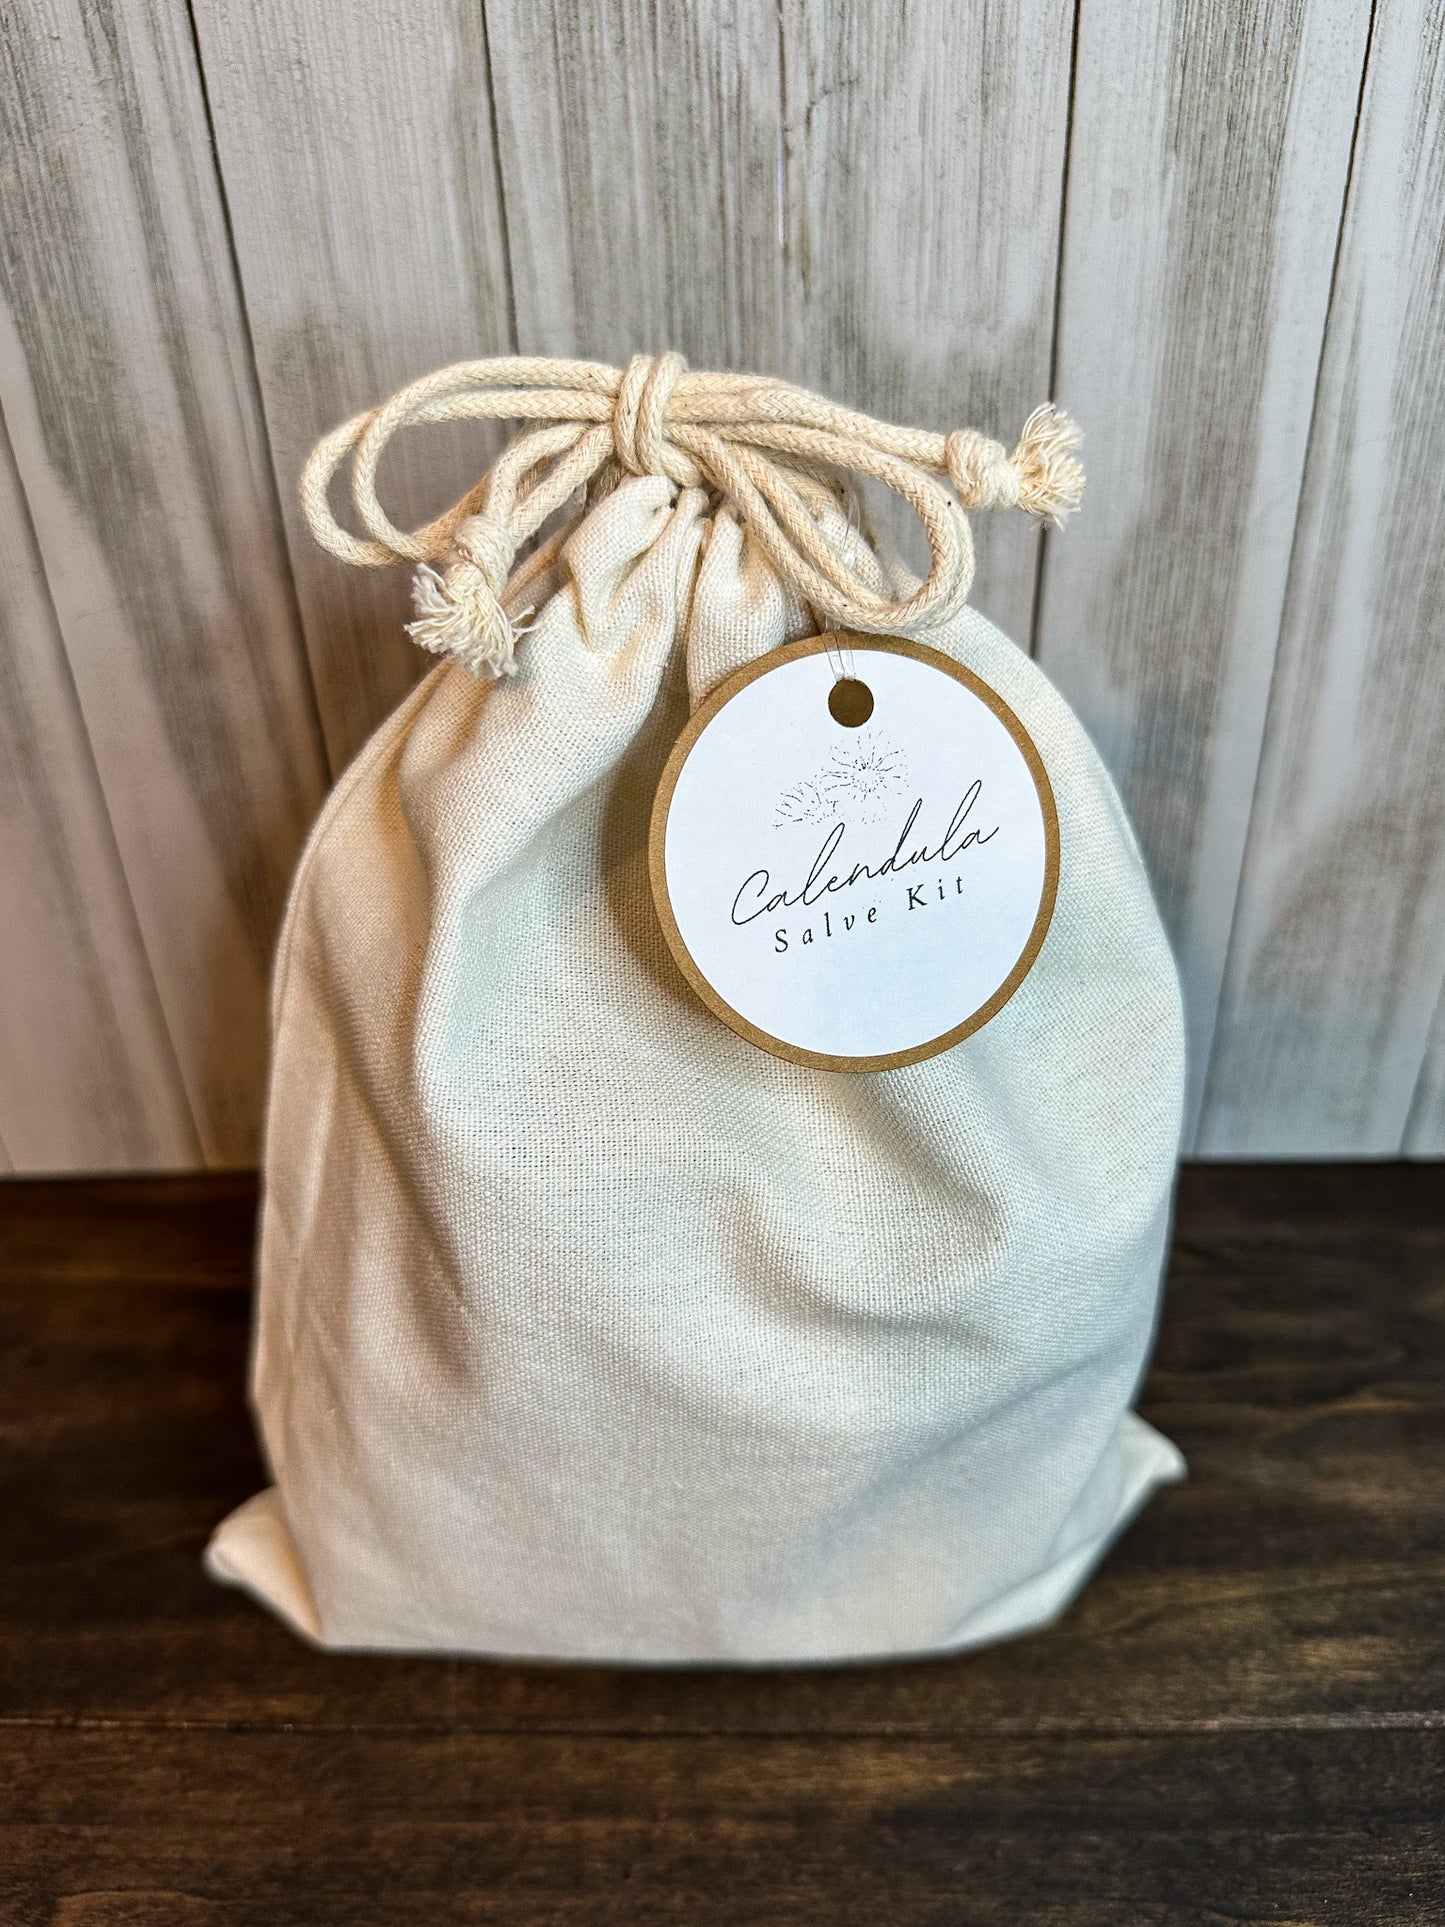 calendula salve kit in canvas bag with white and brown hang tag with grey background and wooden table